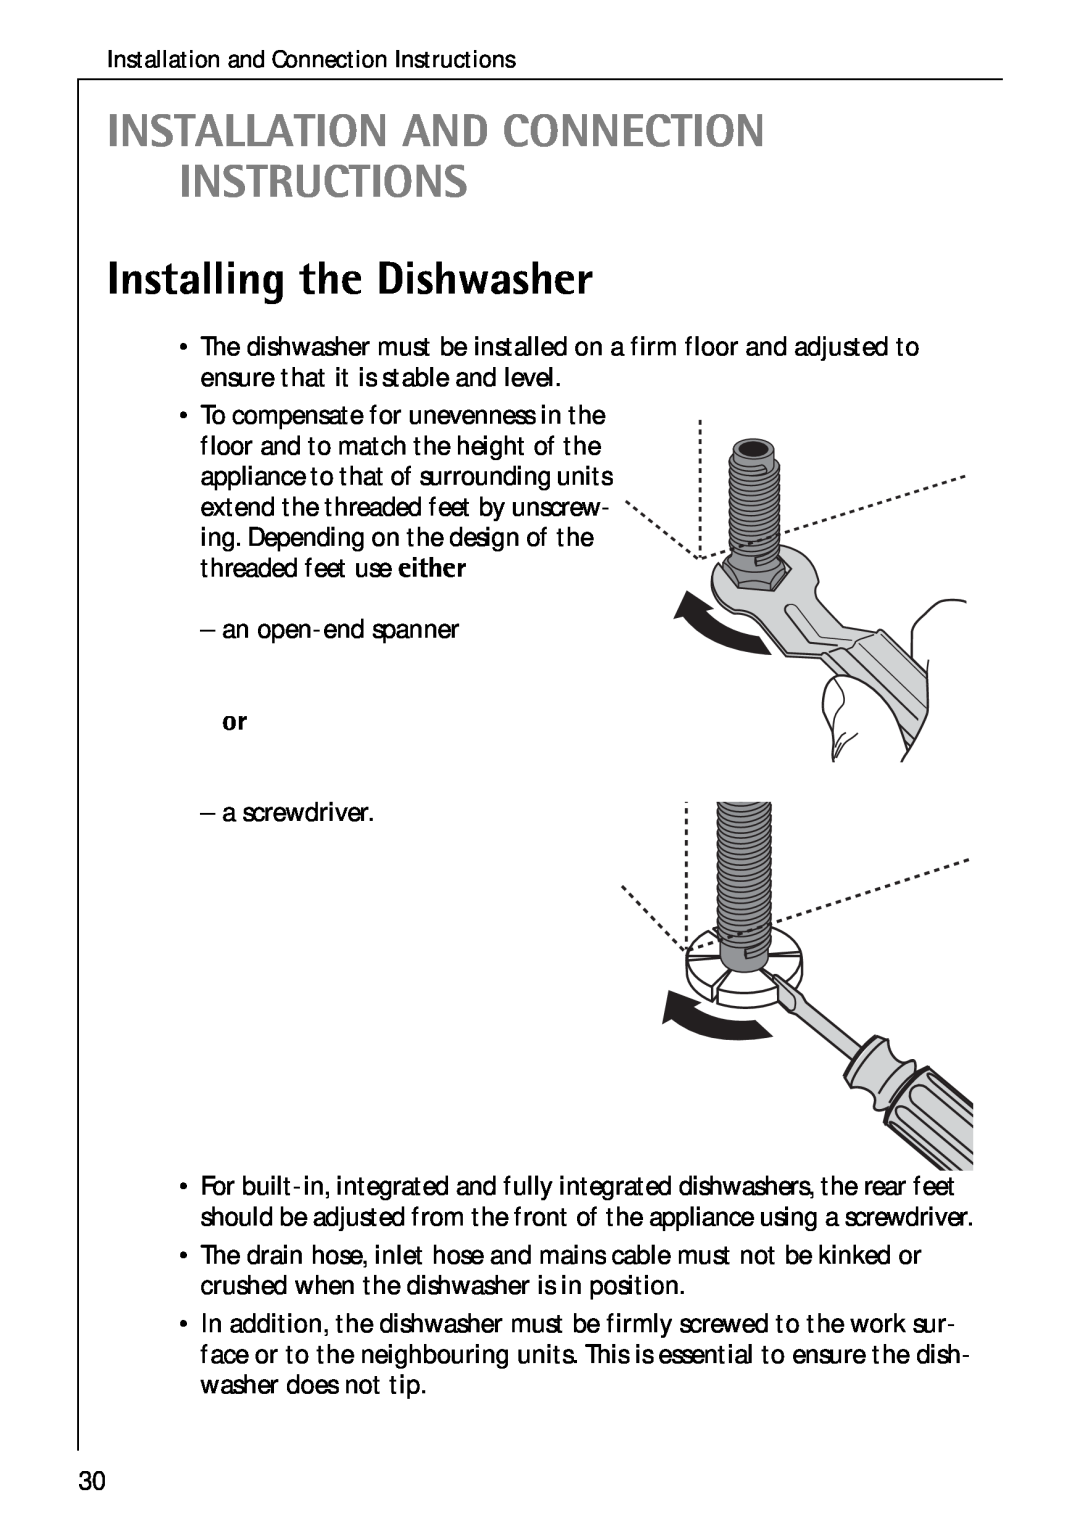 Electrolux 50750 VI manual Installing the Dishwasher, Installation And Connection Instructions 